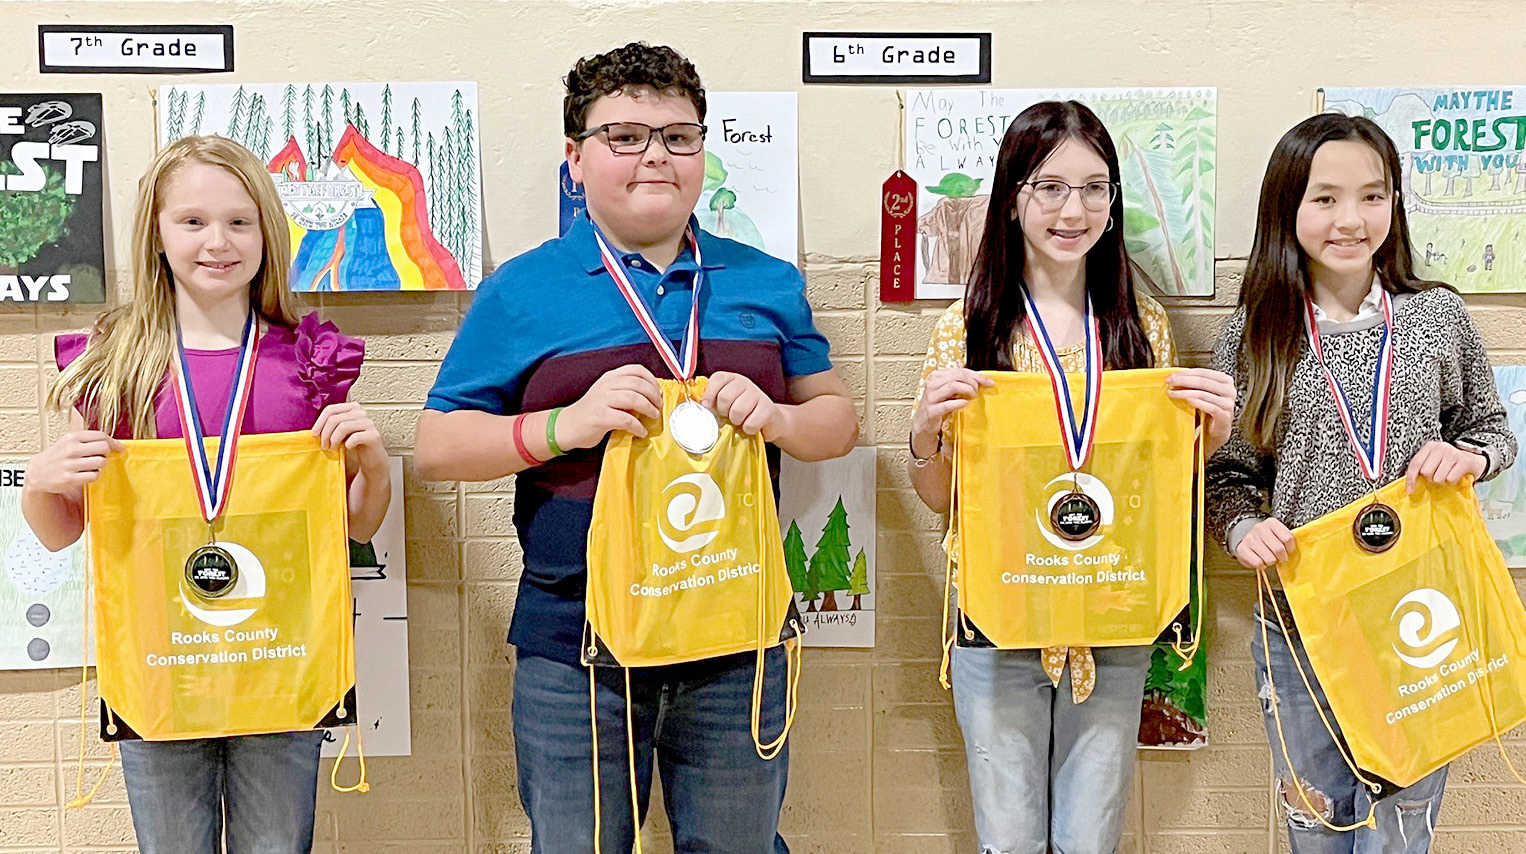 SIXTH-GRADE POSTER WINNERS (l to r)—1st, Daylen Beesley, Palco; 2nd, Liam Balthazor, Plainville; 3rd, Eliza Rudman, Plainville; and 4th, Hartley Takaishi, Plainville.